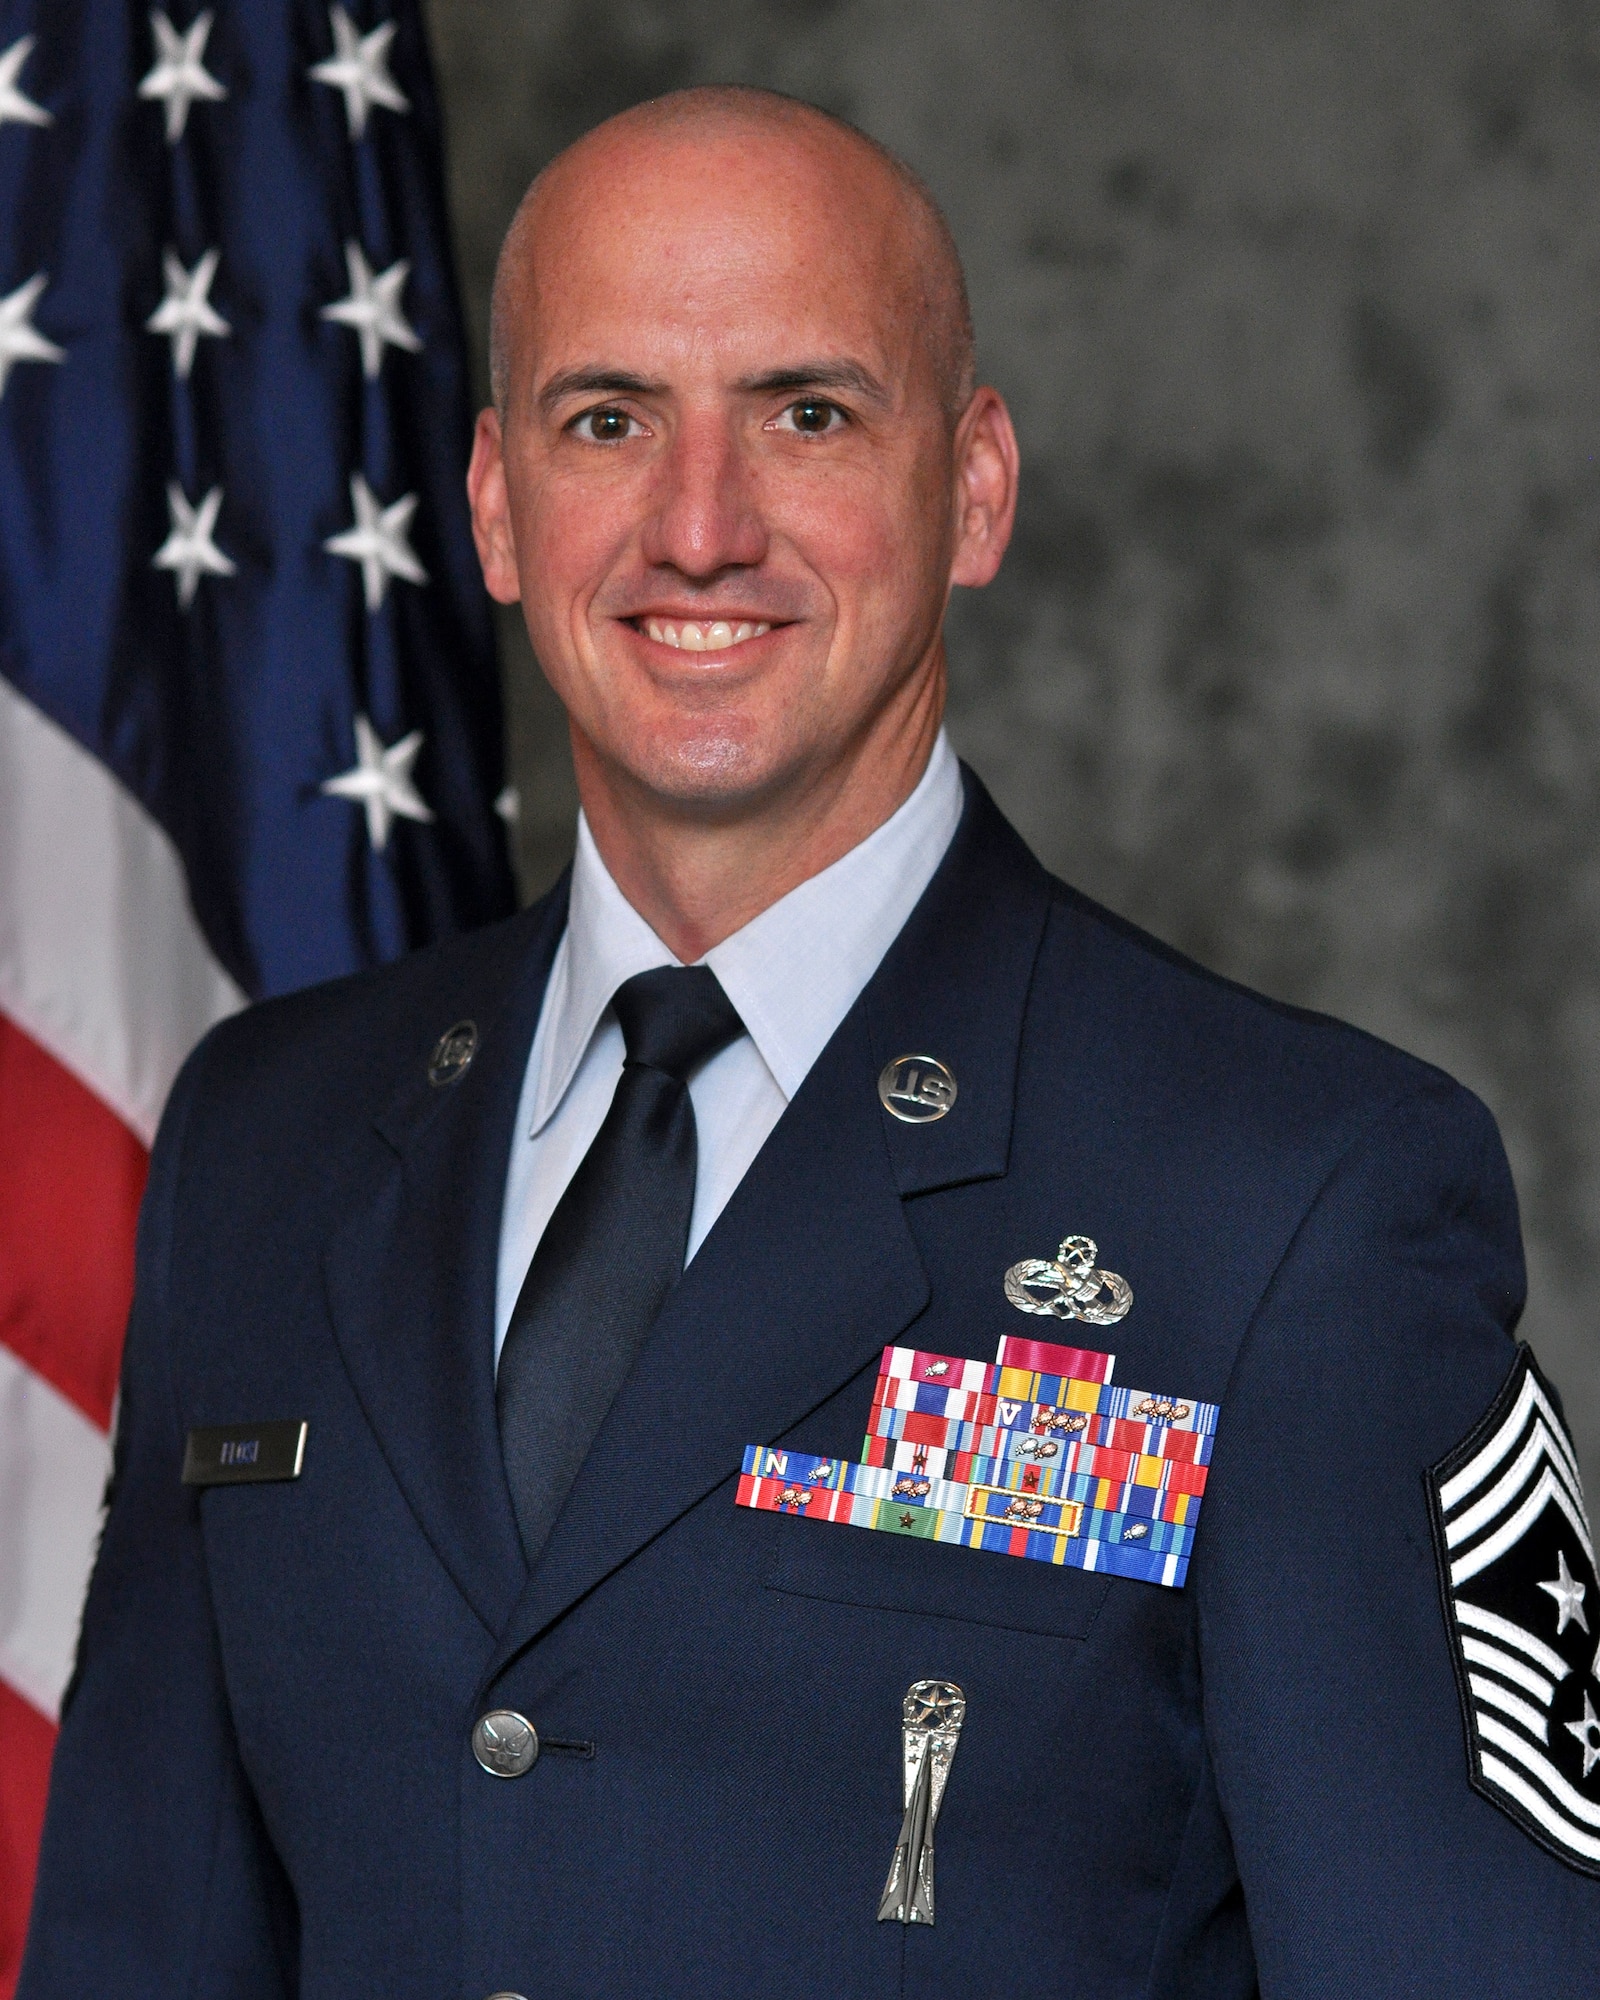 Command chief CMSgt David Flosi, Air Force Sustainment Center